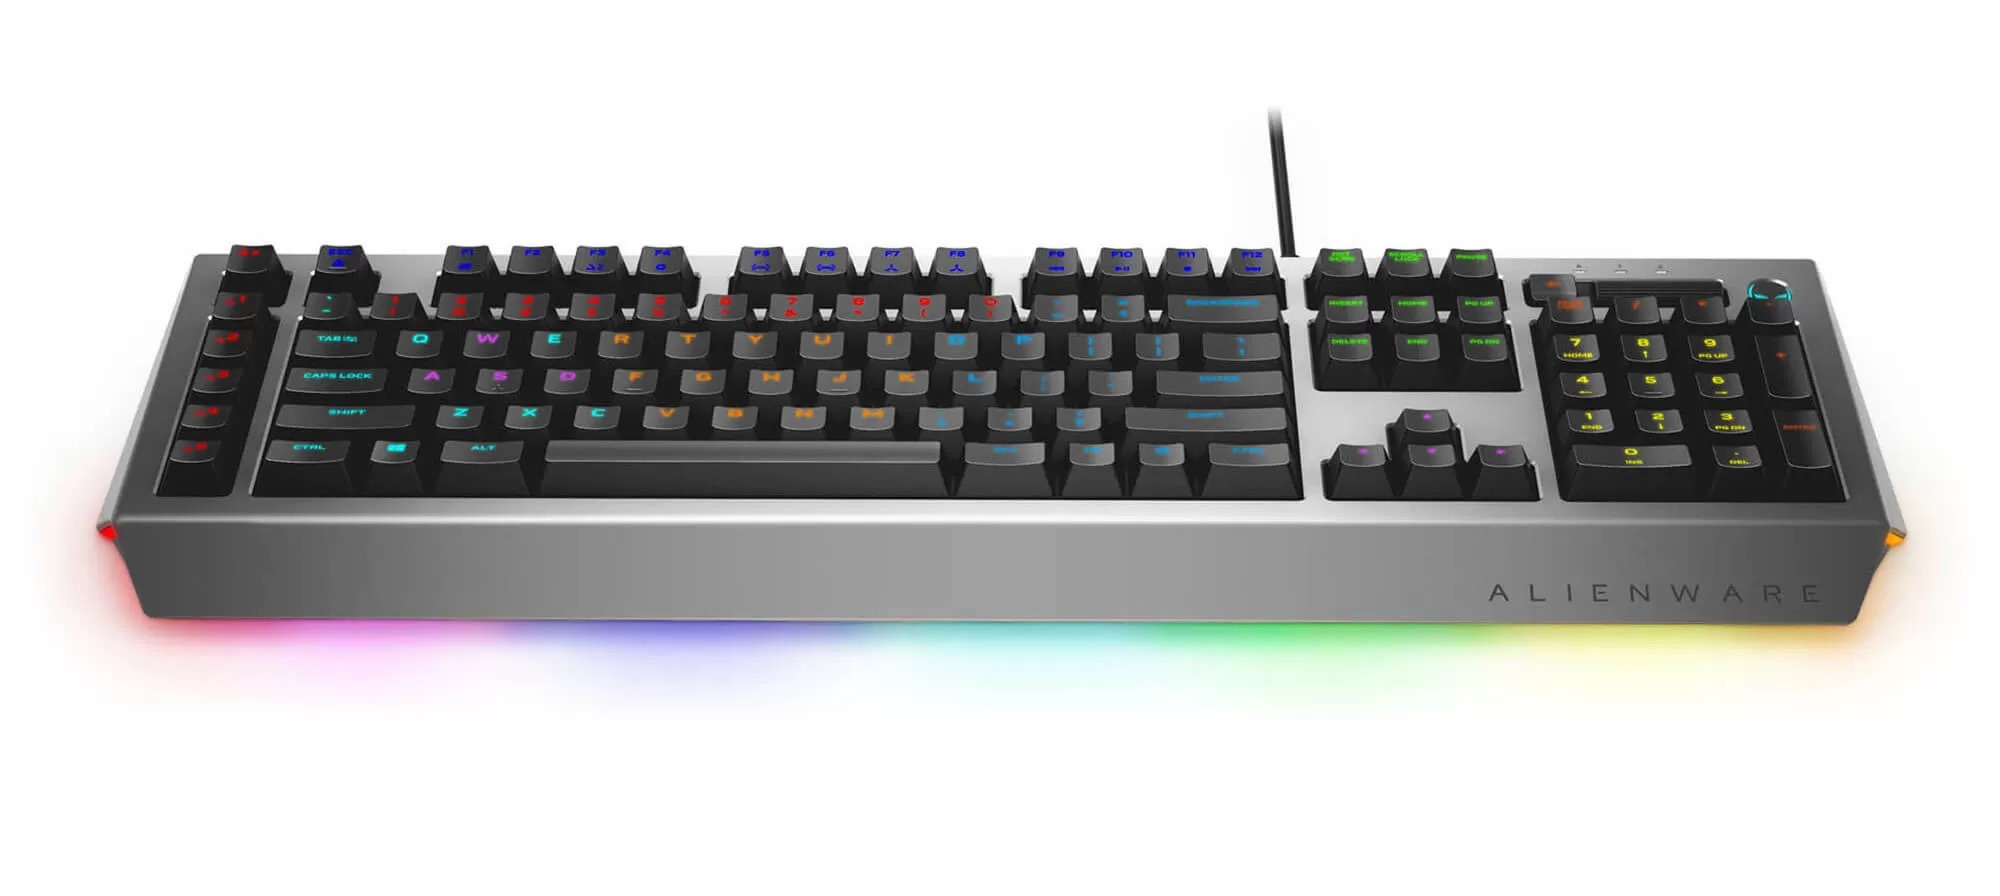 How To Link Alienware Pro Gaming Keyboard AW768 To PC